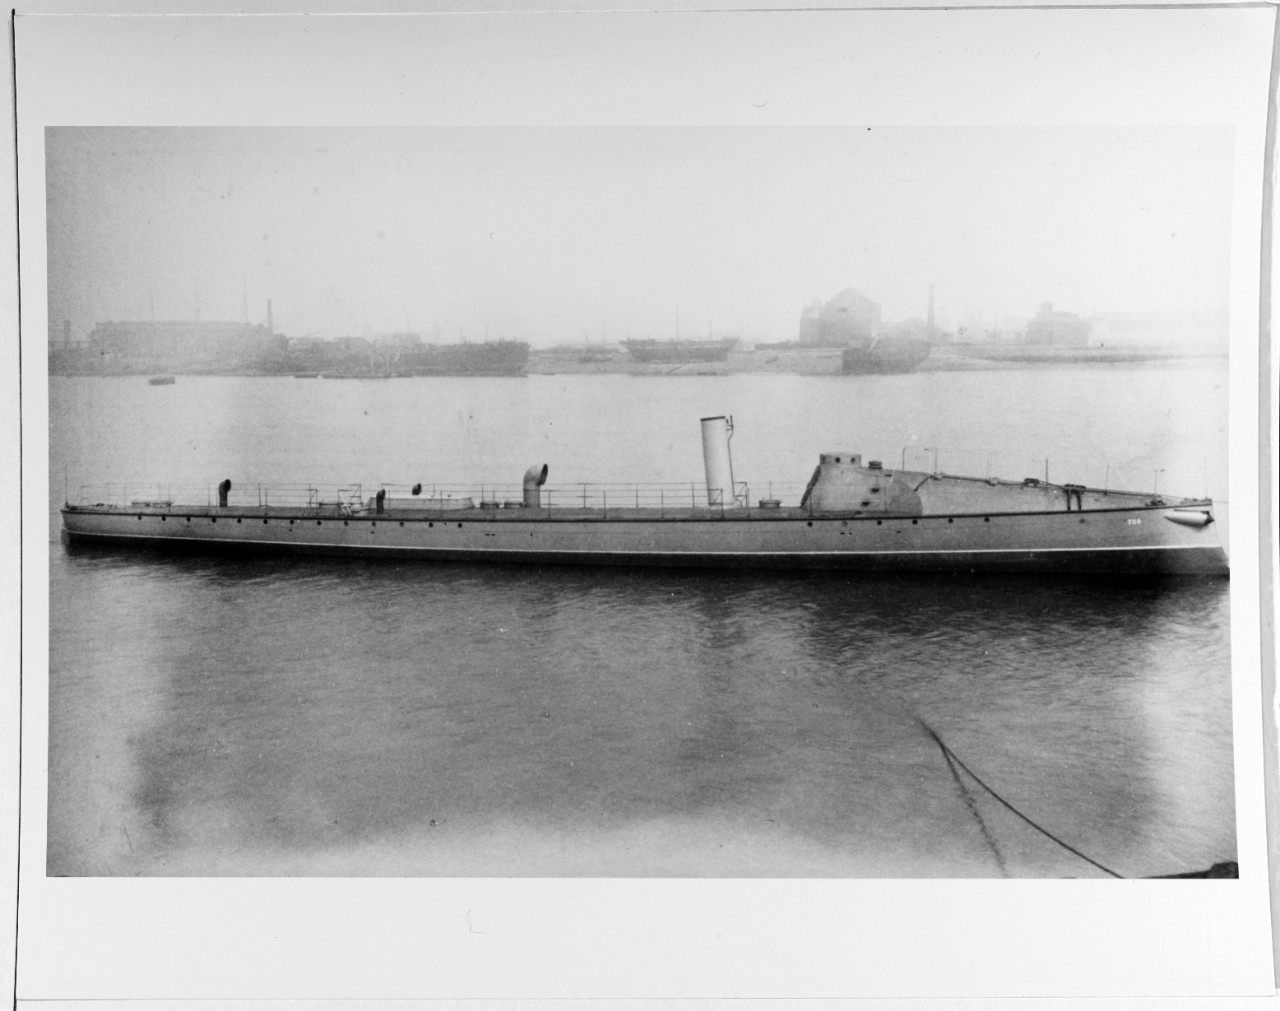 Chinese torpedo boat, built by Yarrow in 1887.